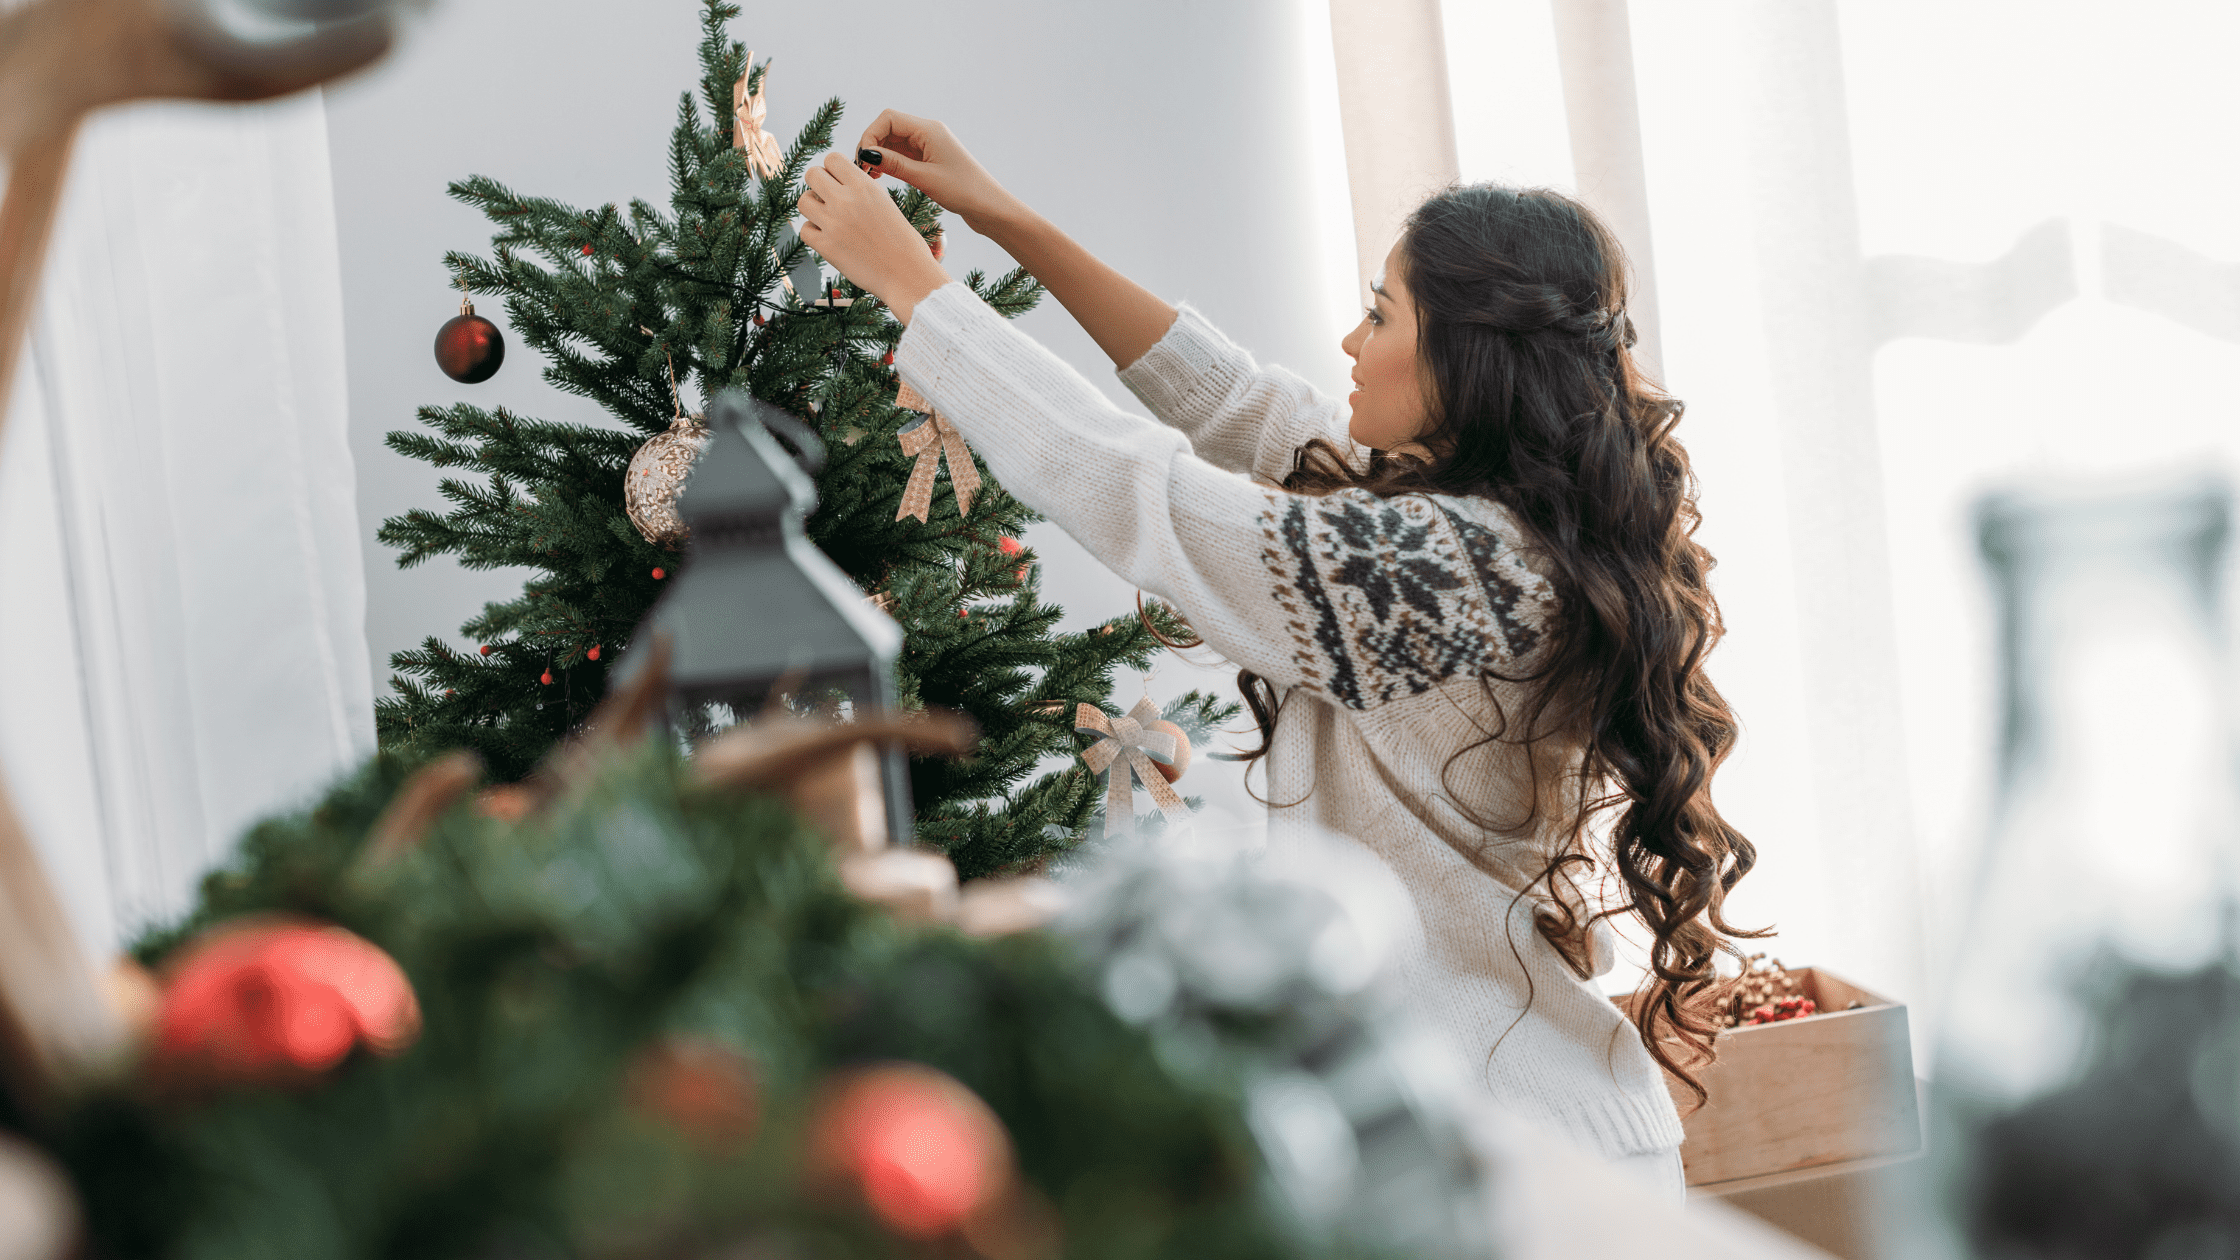 5 Ways to Make Christmas Special on a Budget